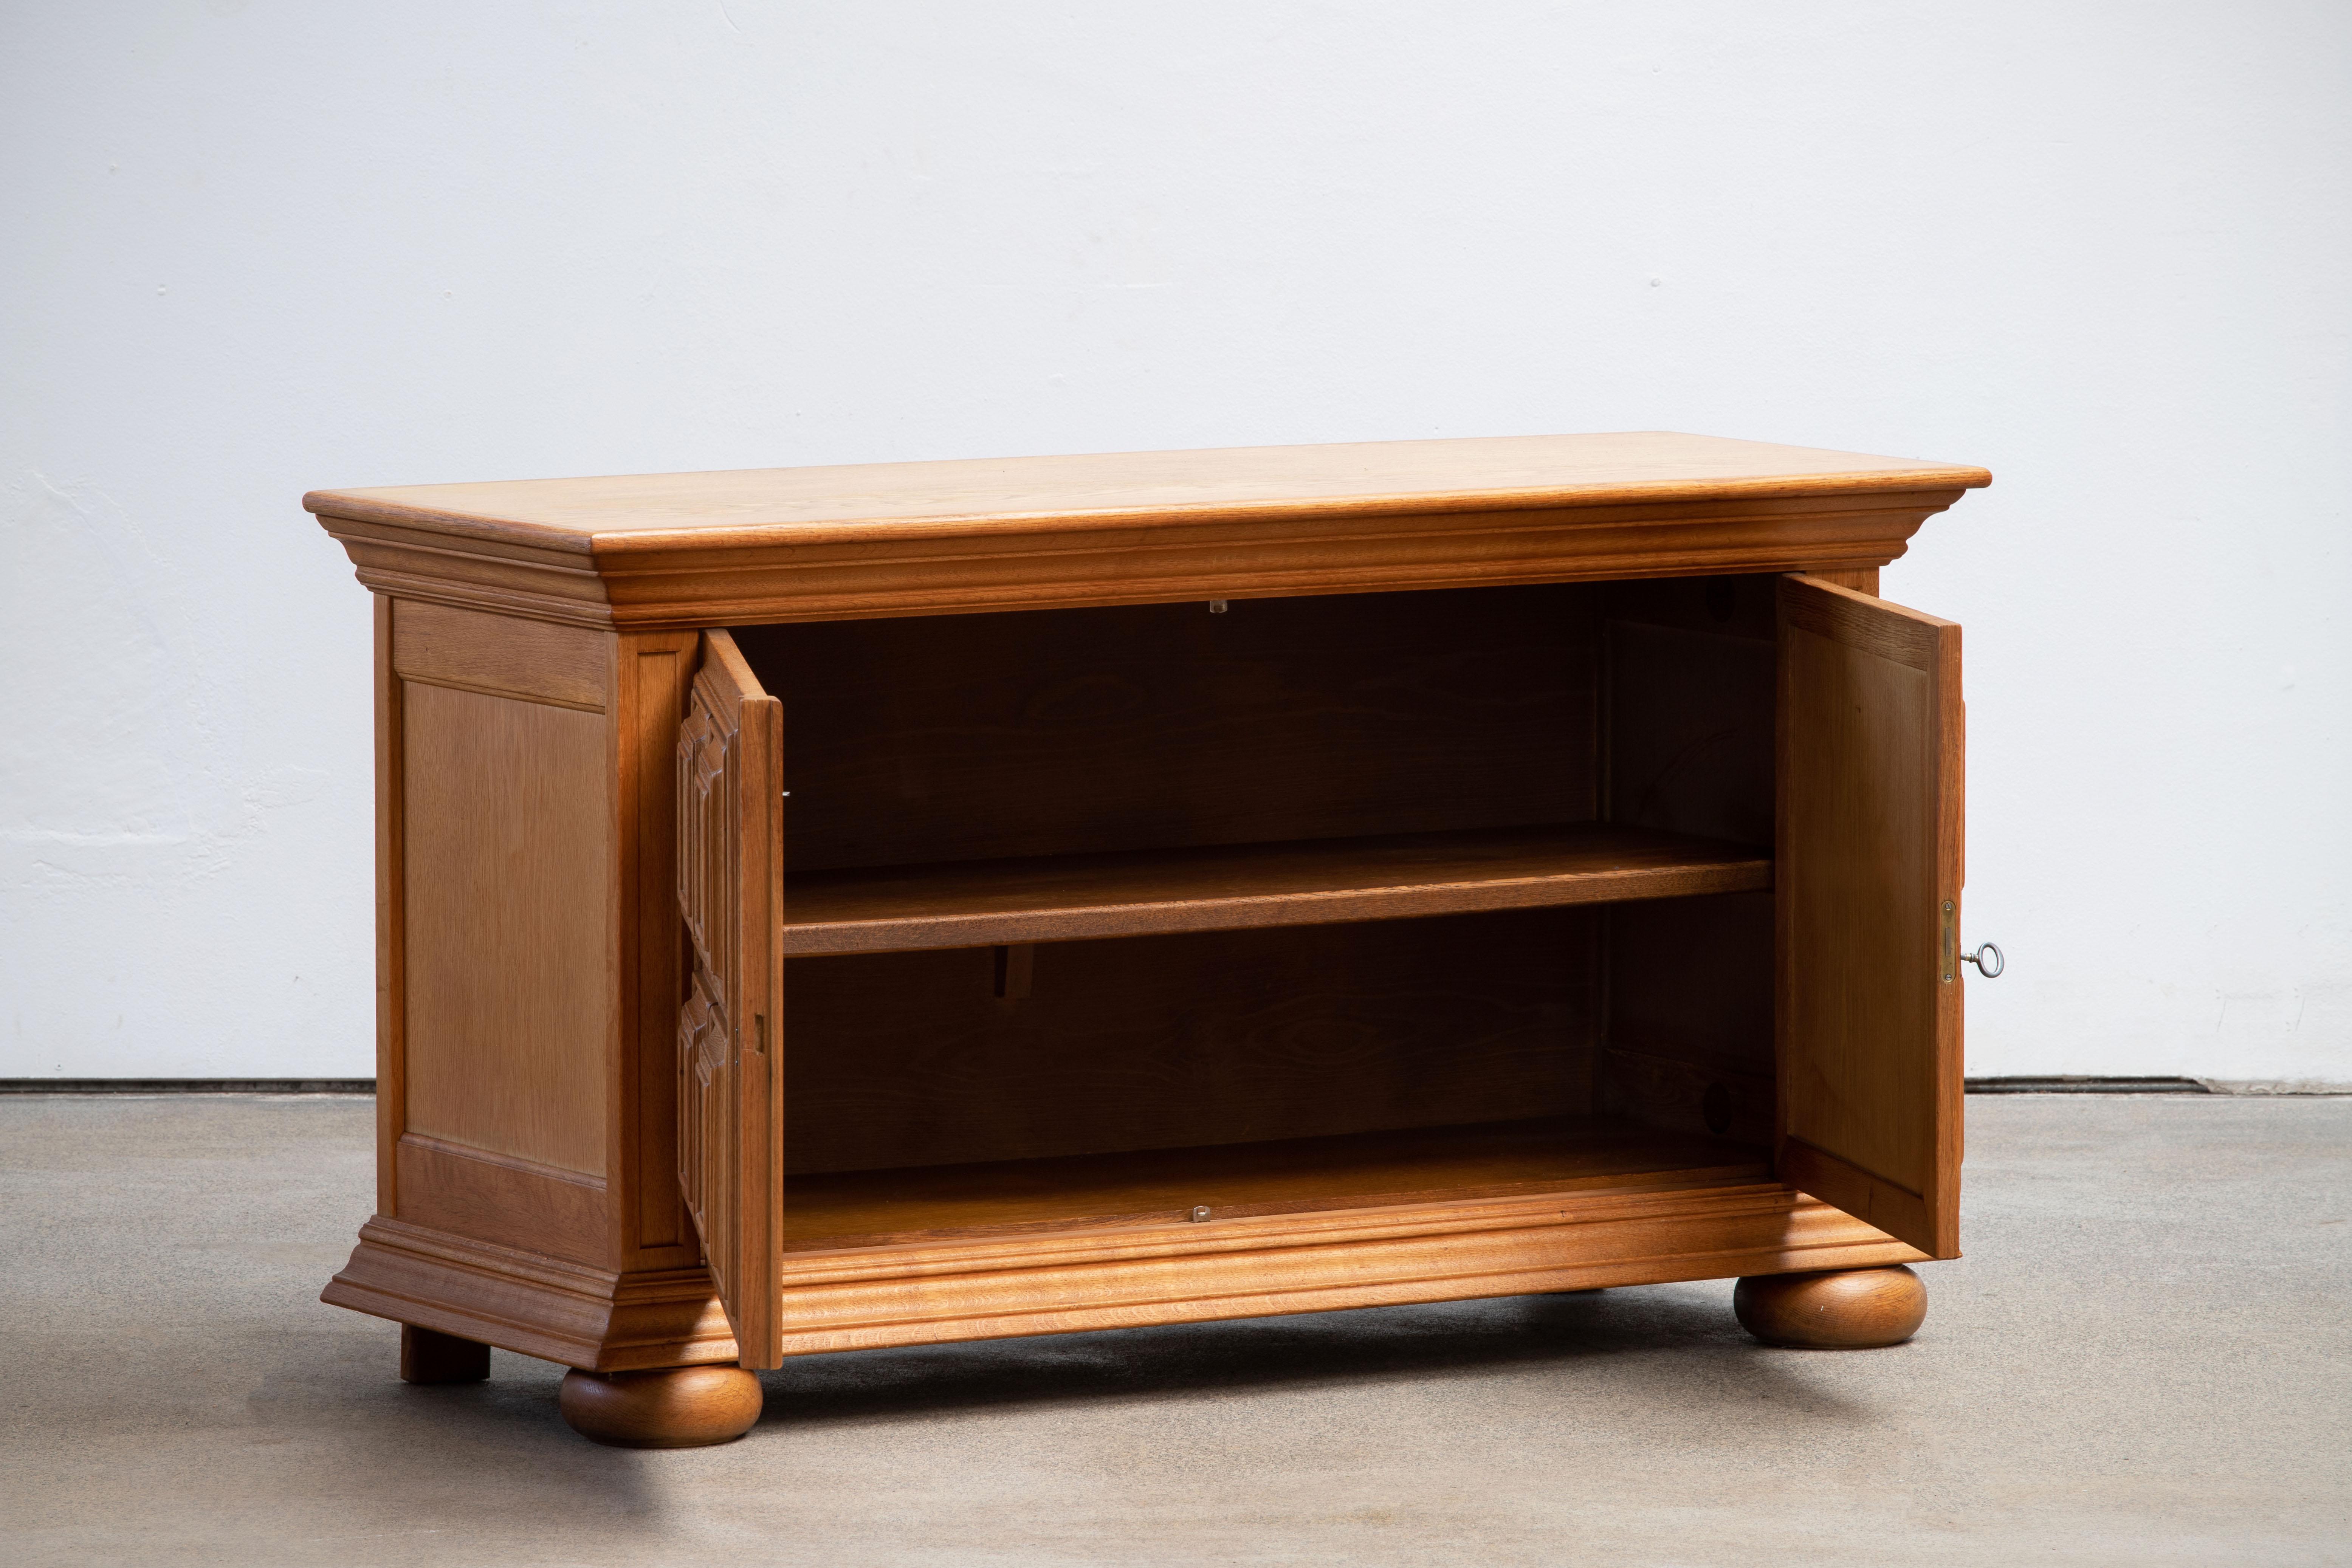 Brutalist solid oak sideboard, credenza, Spanish Colonial. The buffet features stunning Oak structure on door panels. It offers ample storage, with shelve behind the doors. A unique blend of Art Deco Spanish and Brutalist Modern design. The